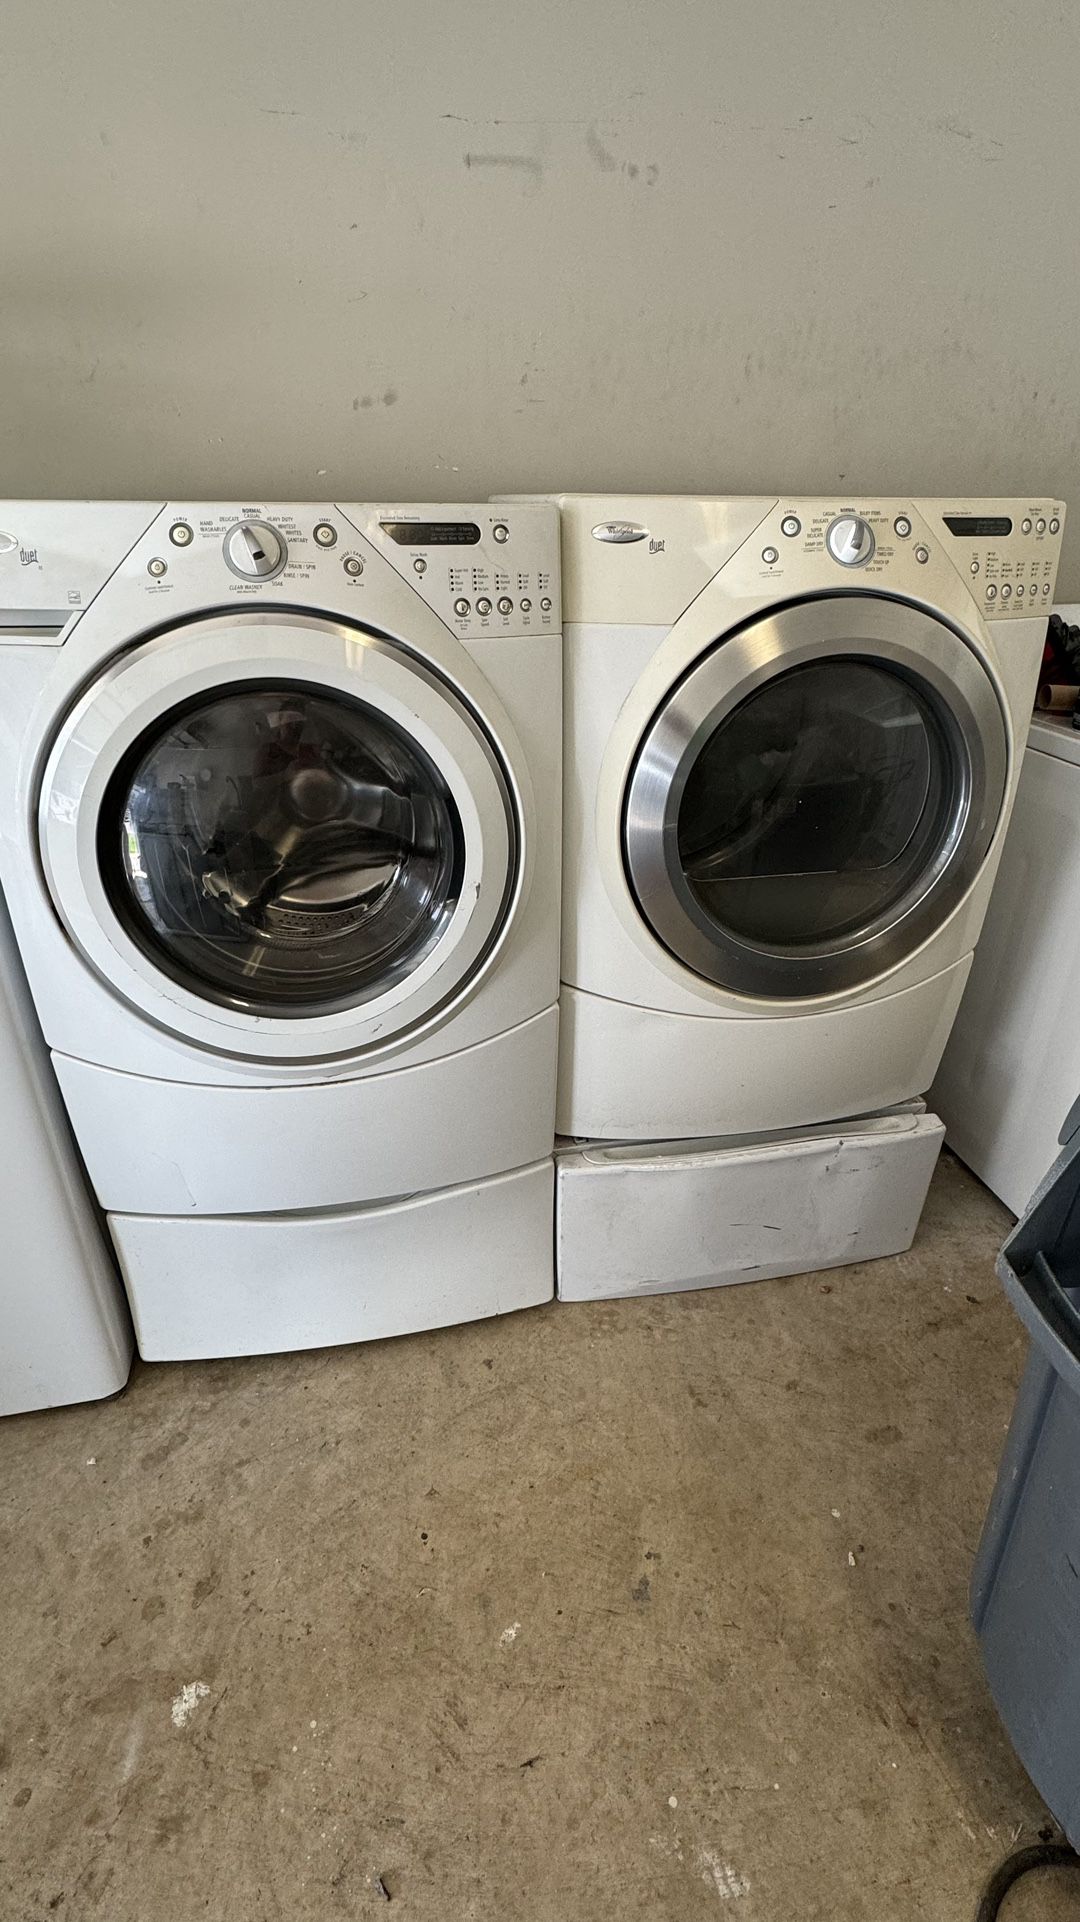 WHIRLPOOL FRONT LOAD ELECTRIC WASHER & DRYER $150 For Both 